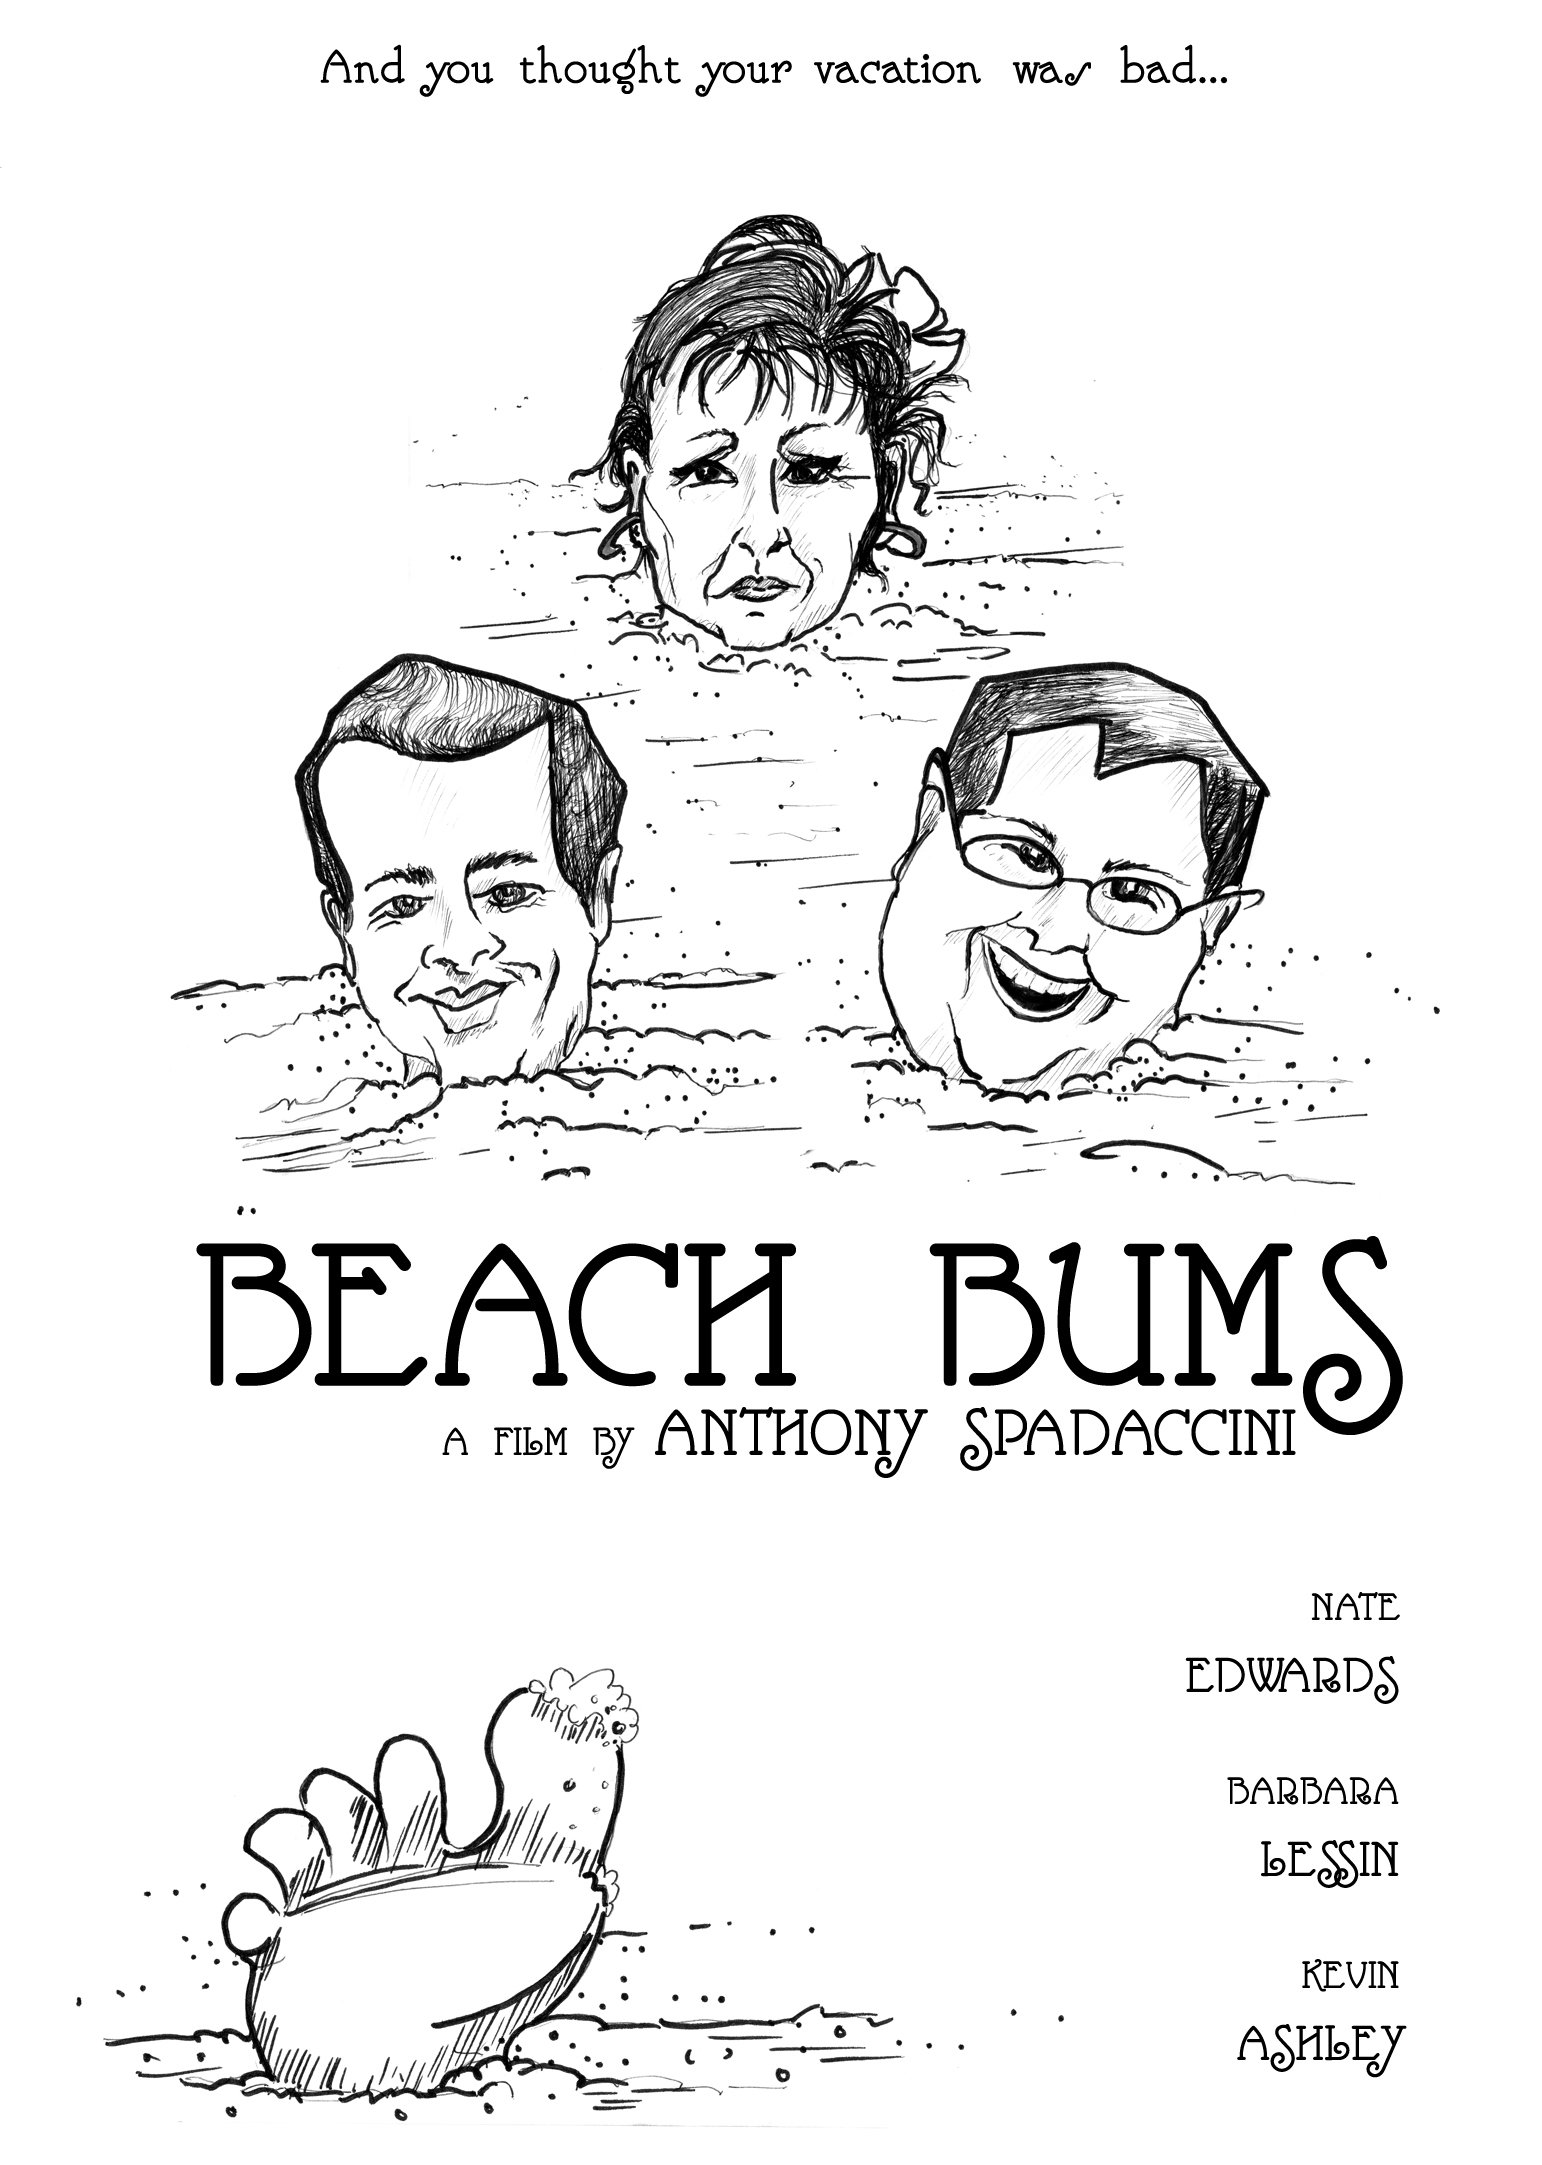 Kevin Ashley, Duane Noch and Barbara Lessin in Beach Bums (2011)